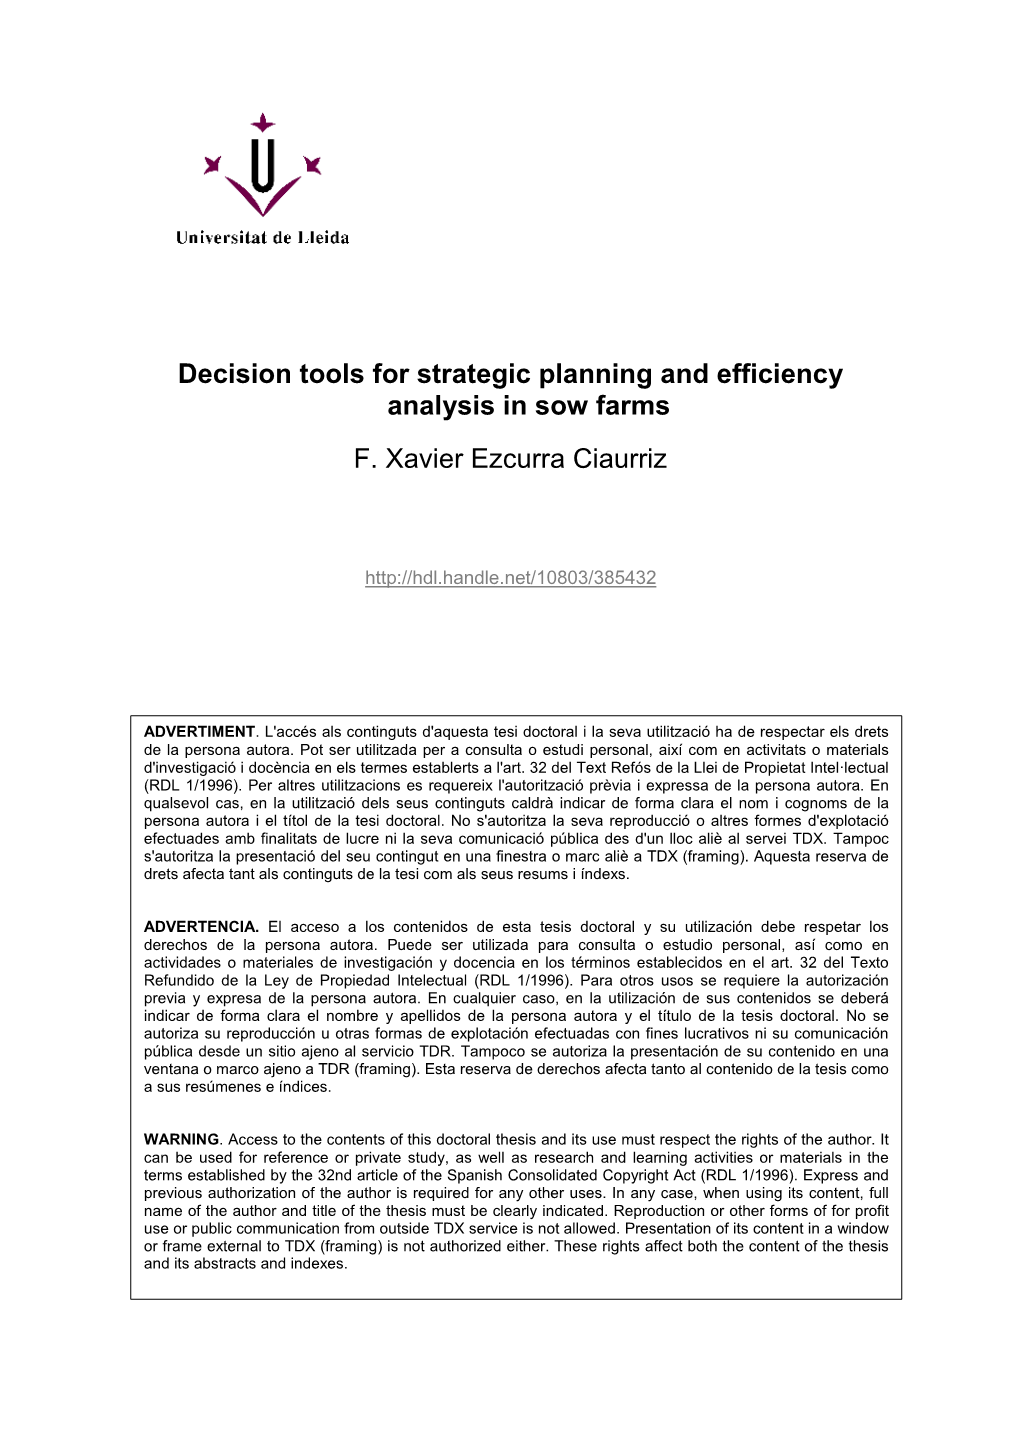 Decision Tools for Strategic Planning and Efficiency Analysis in Sow Farms F. Xavier Ezcurra Ciaurriz